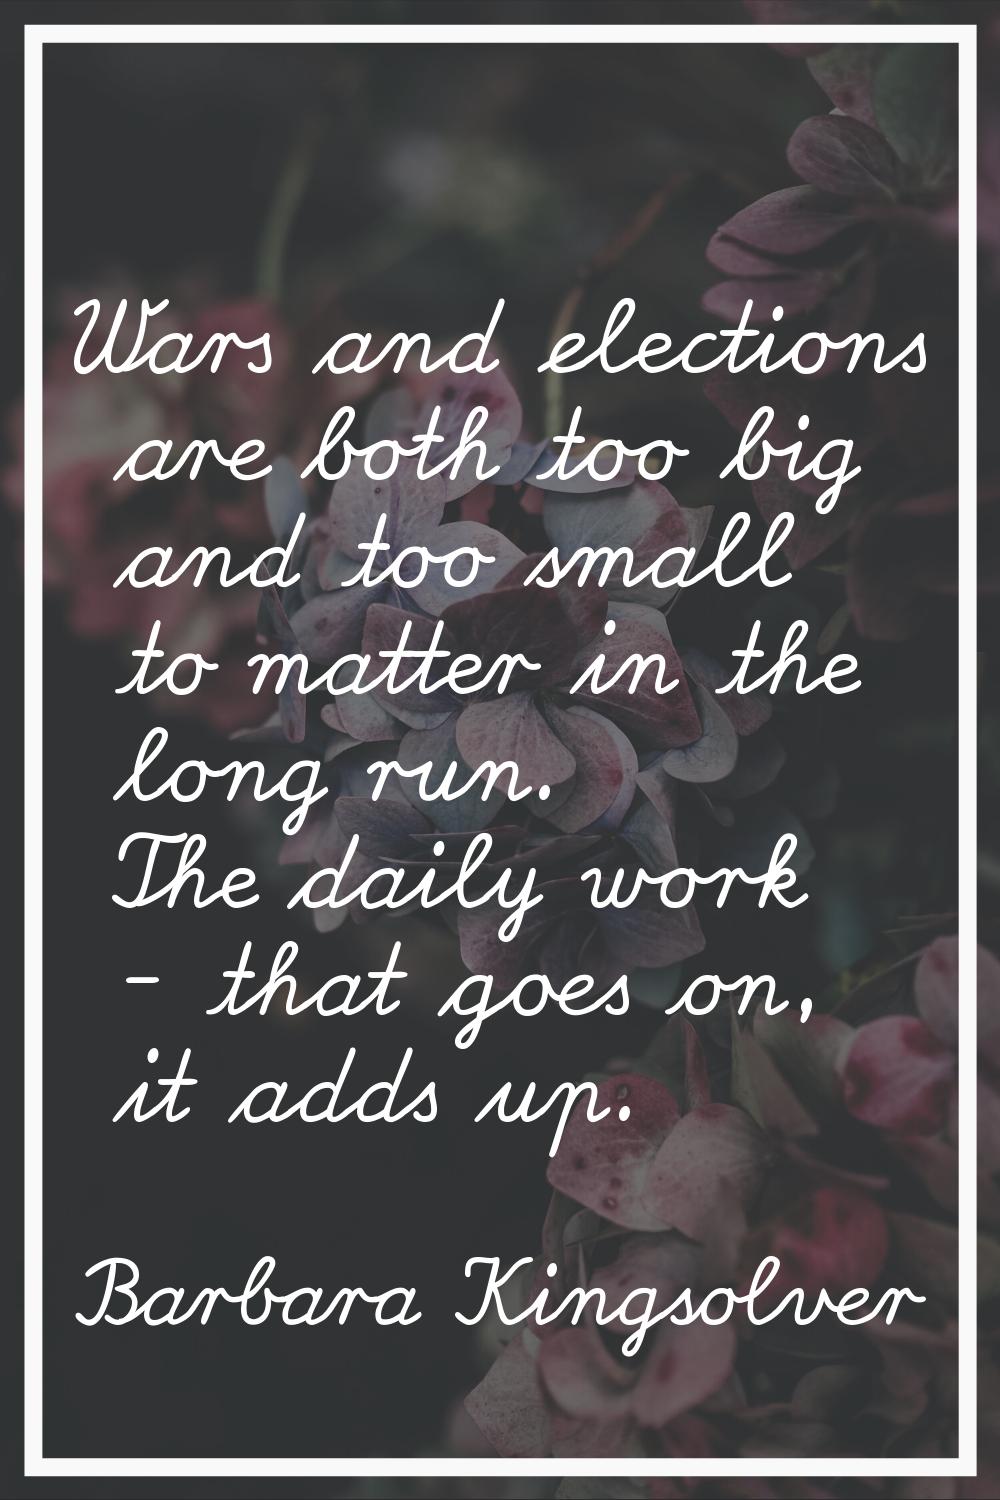 Wars and elections are both too big and too small to matter in the long run. The daily work - that 